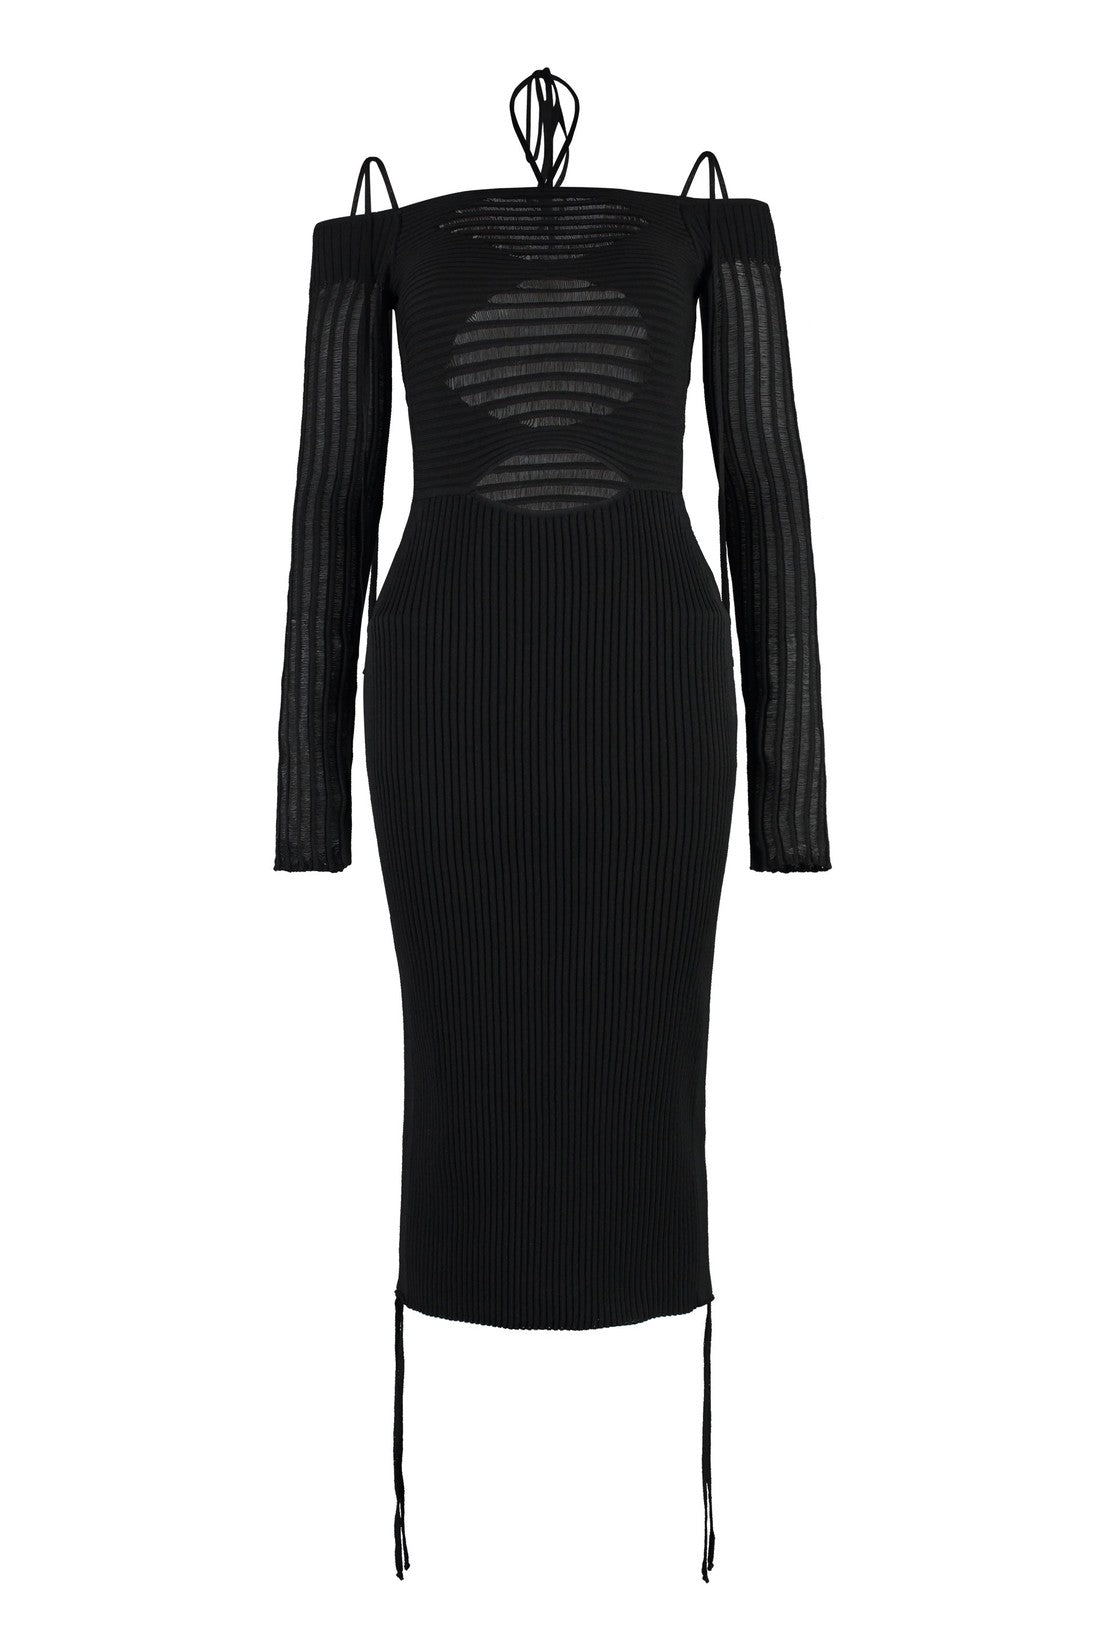 ANDREADAMO-OUTLET-SALE-Ribbed knit dress-ARCHIVIST